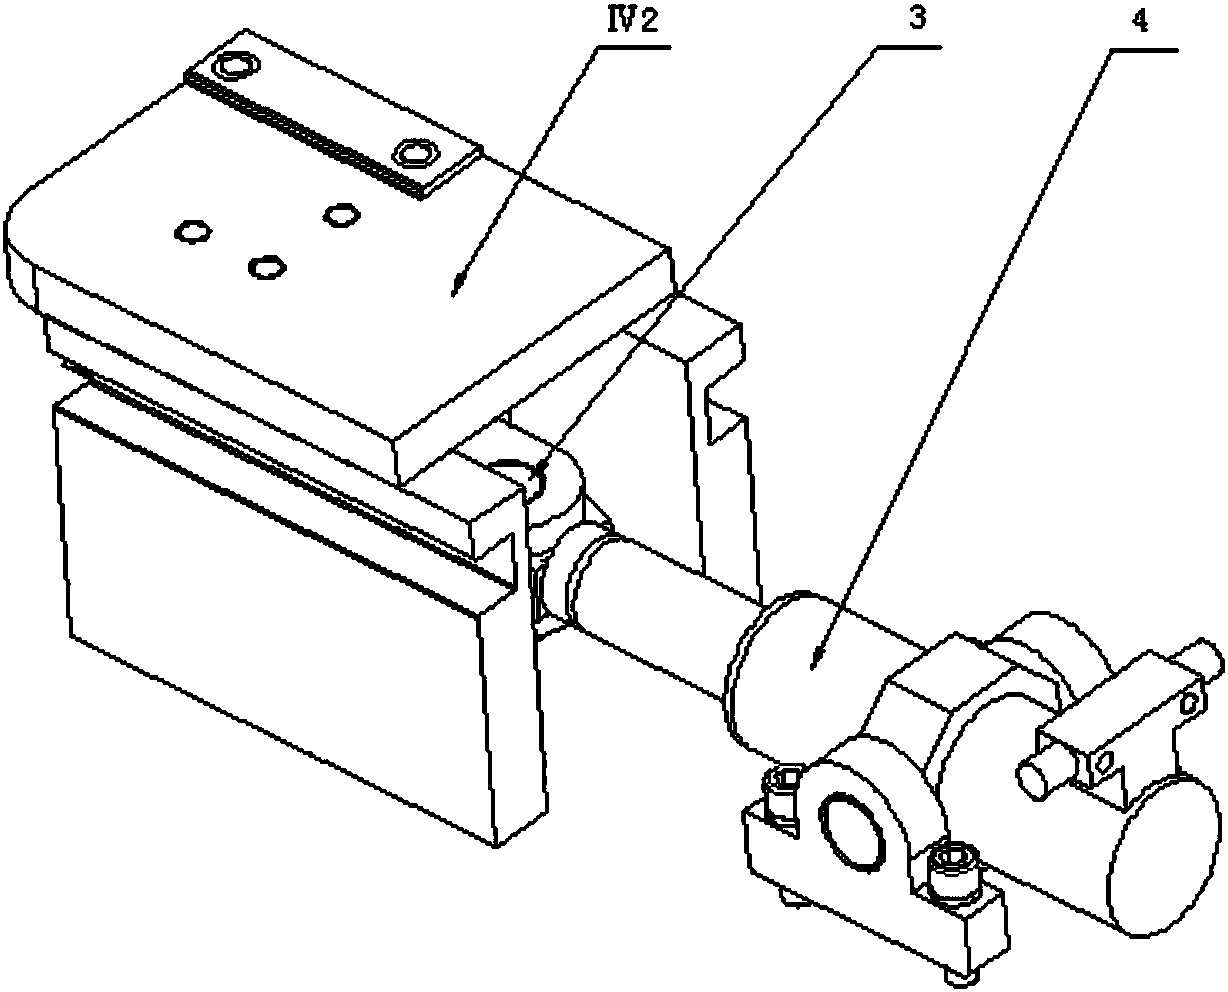 Design method of cutter head for full-face rock tunneling machine with high-pressure water jet